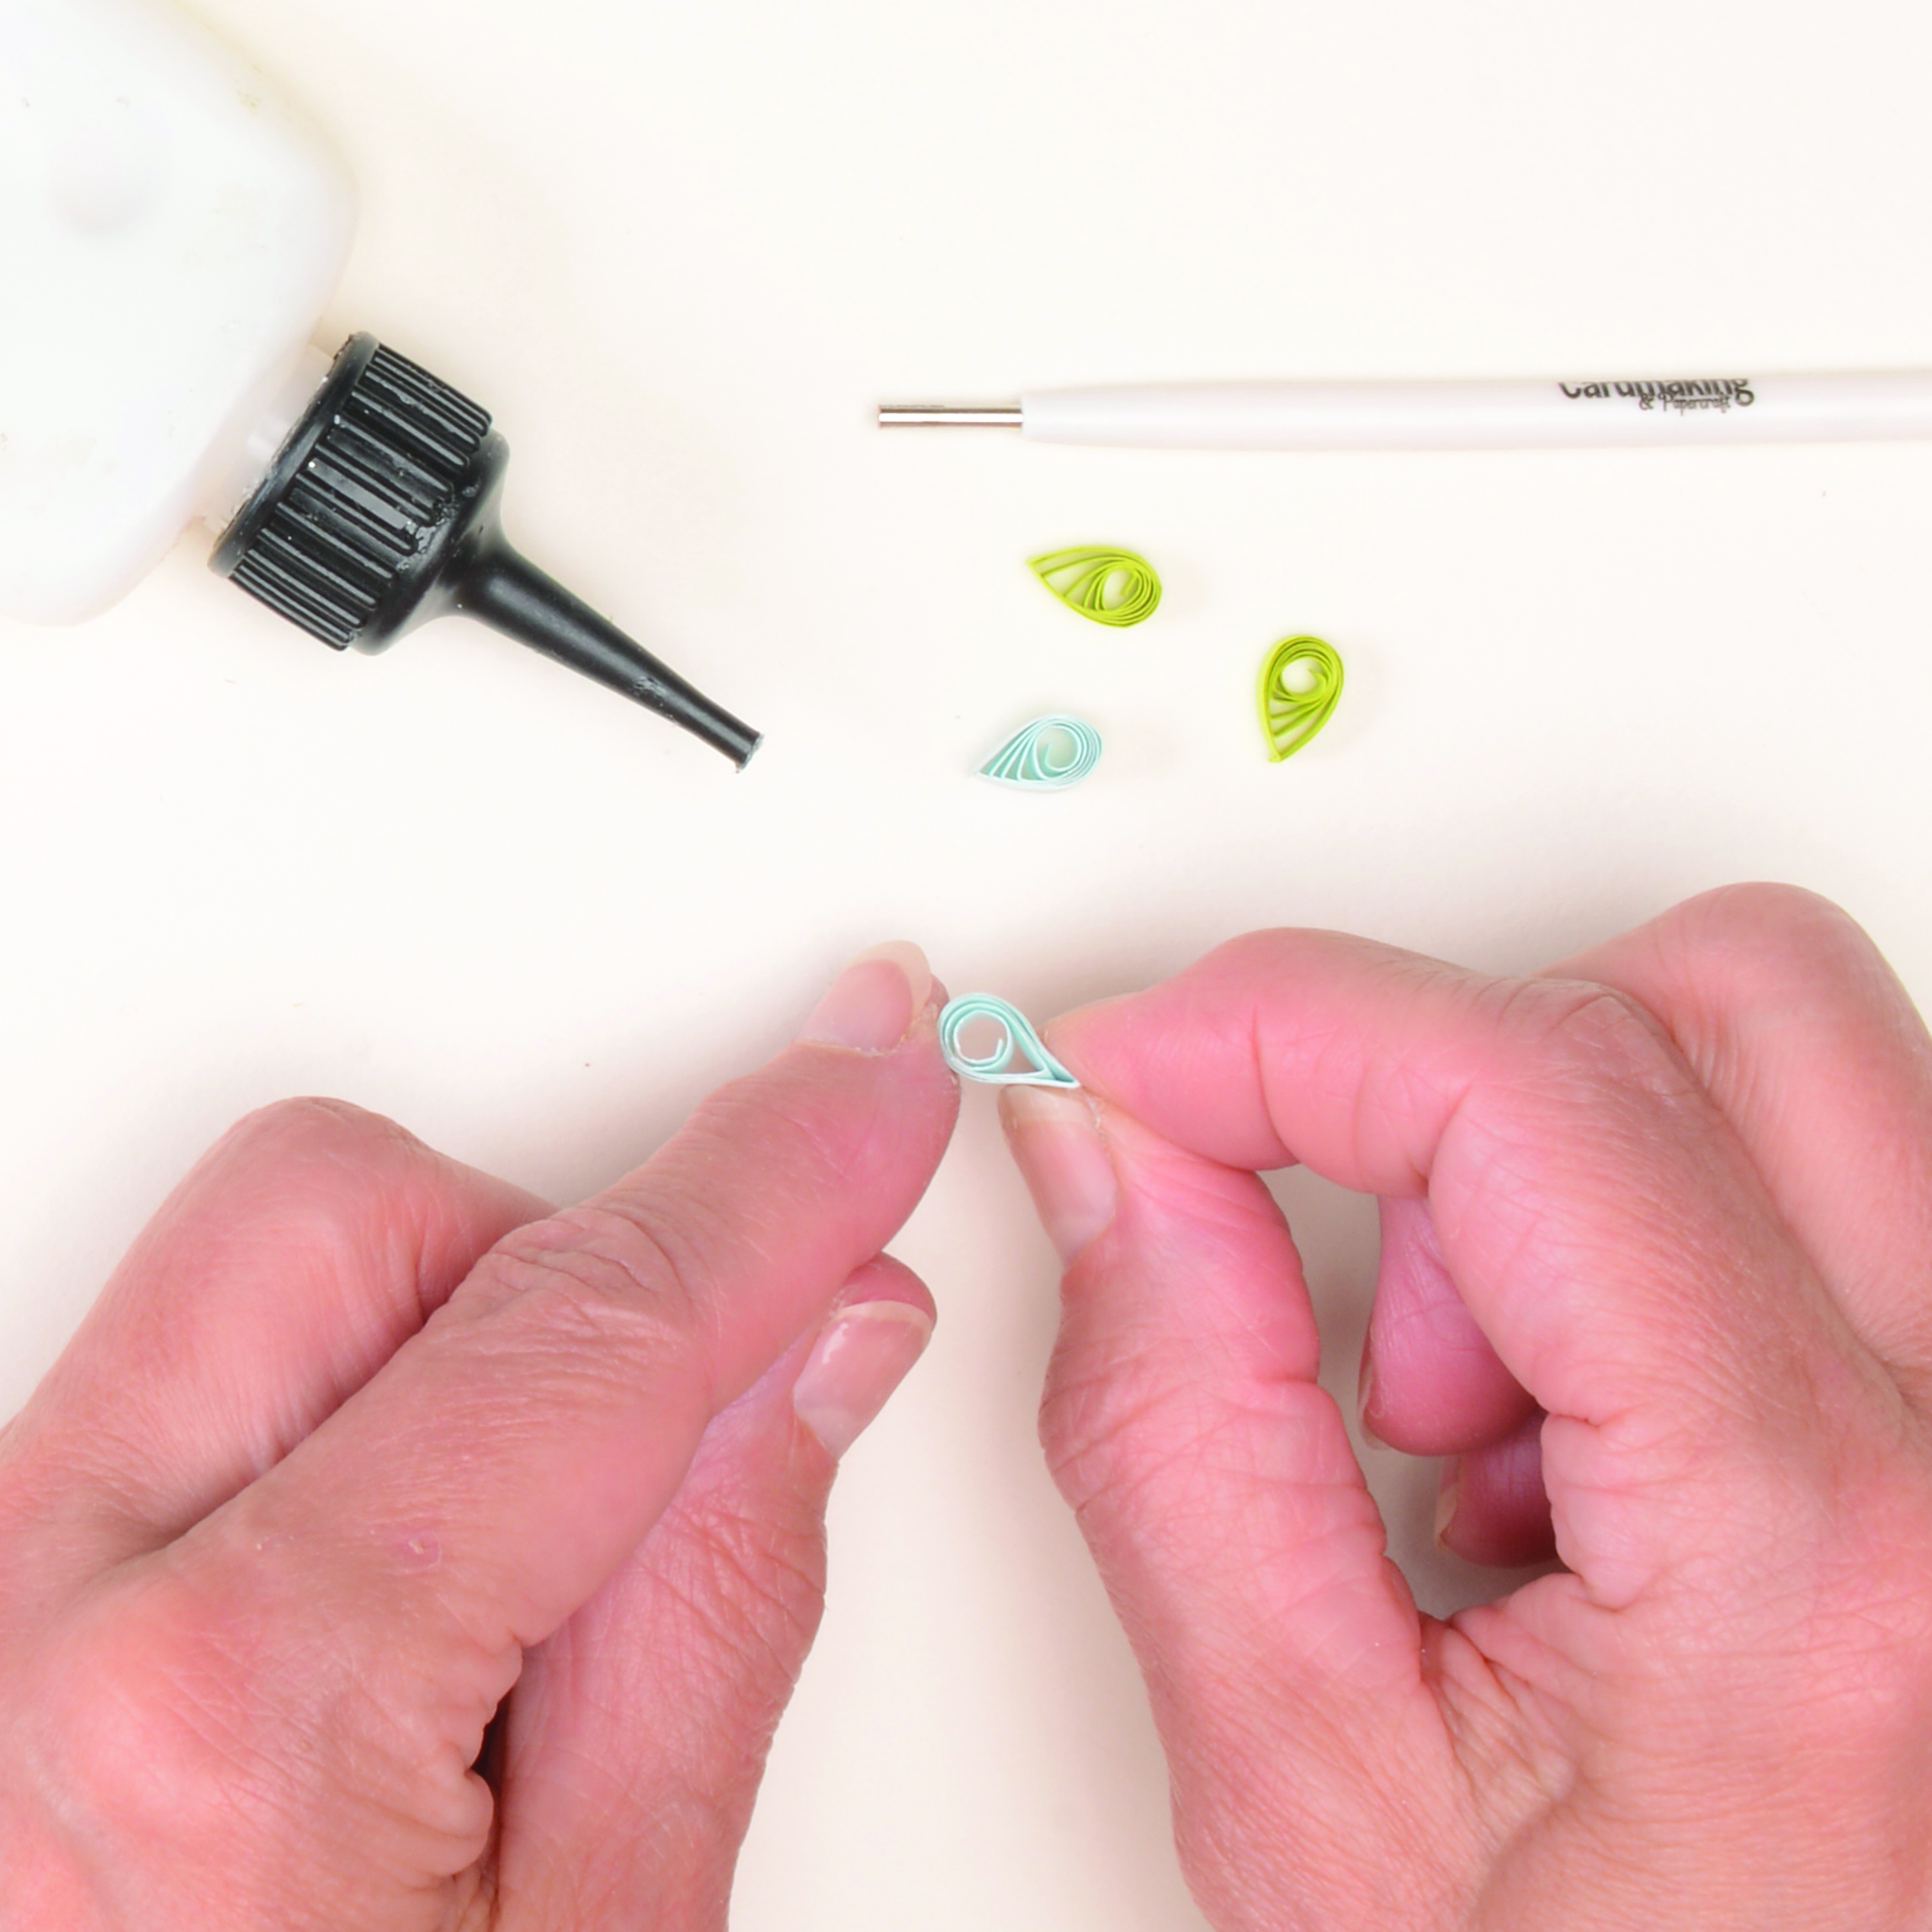 How to make paper beads